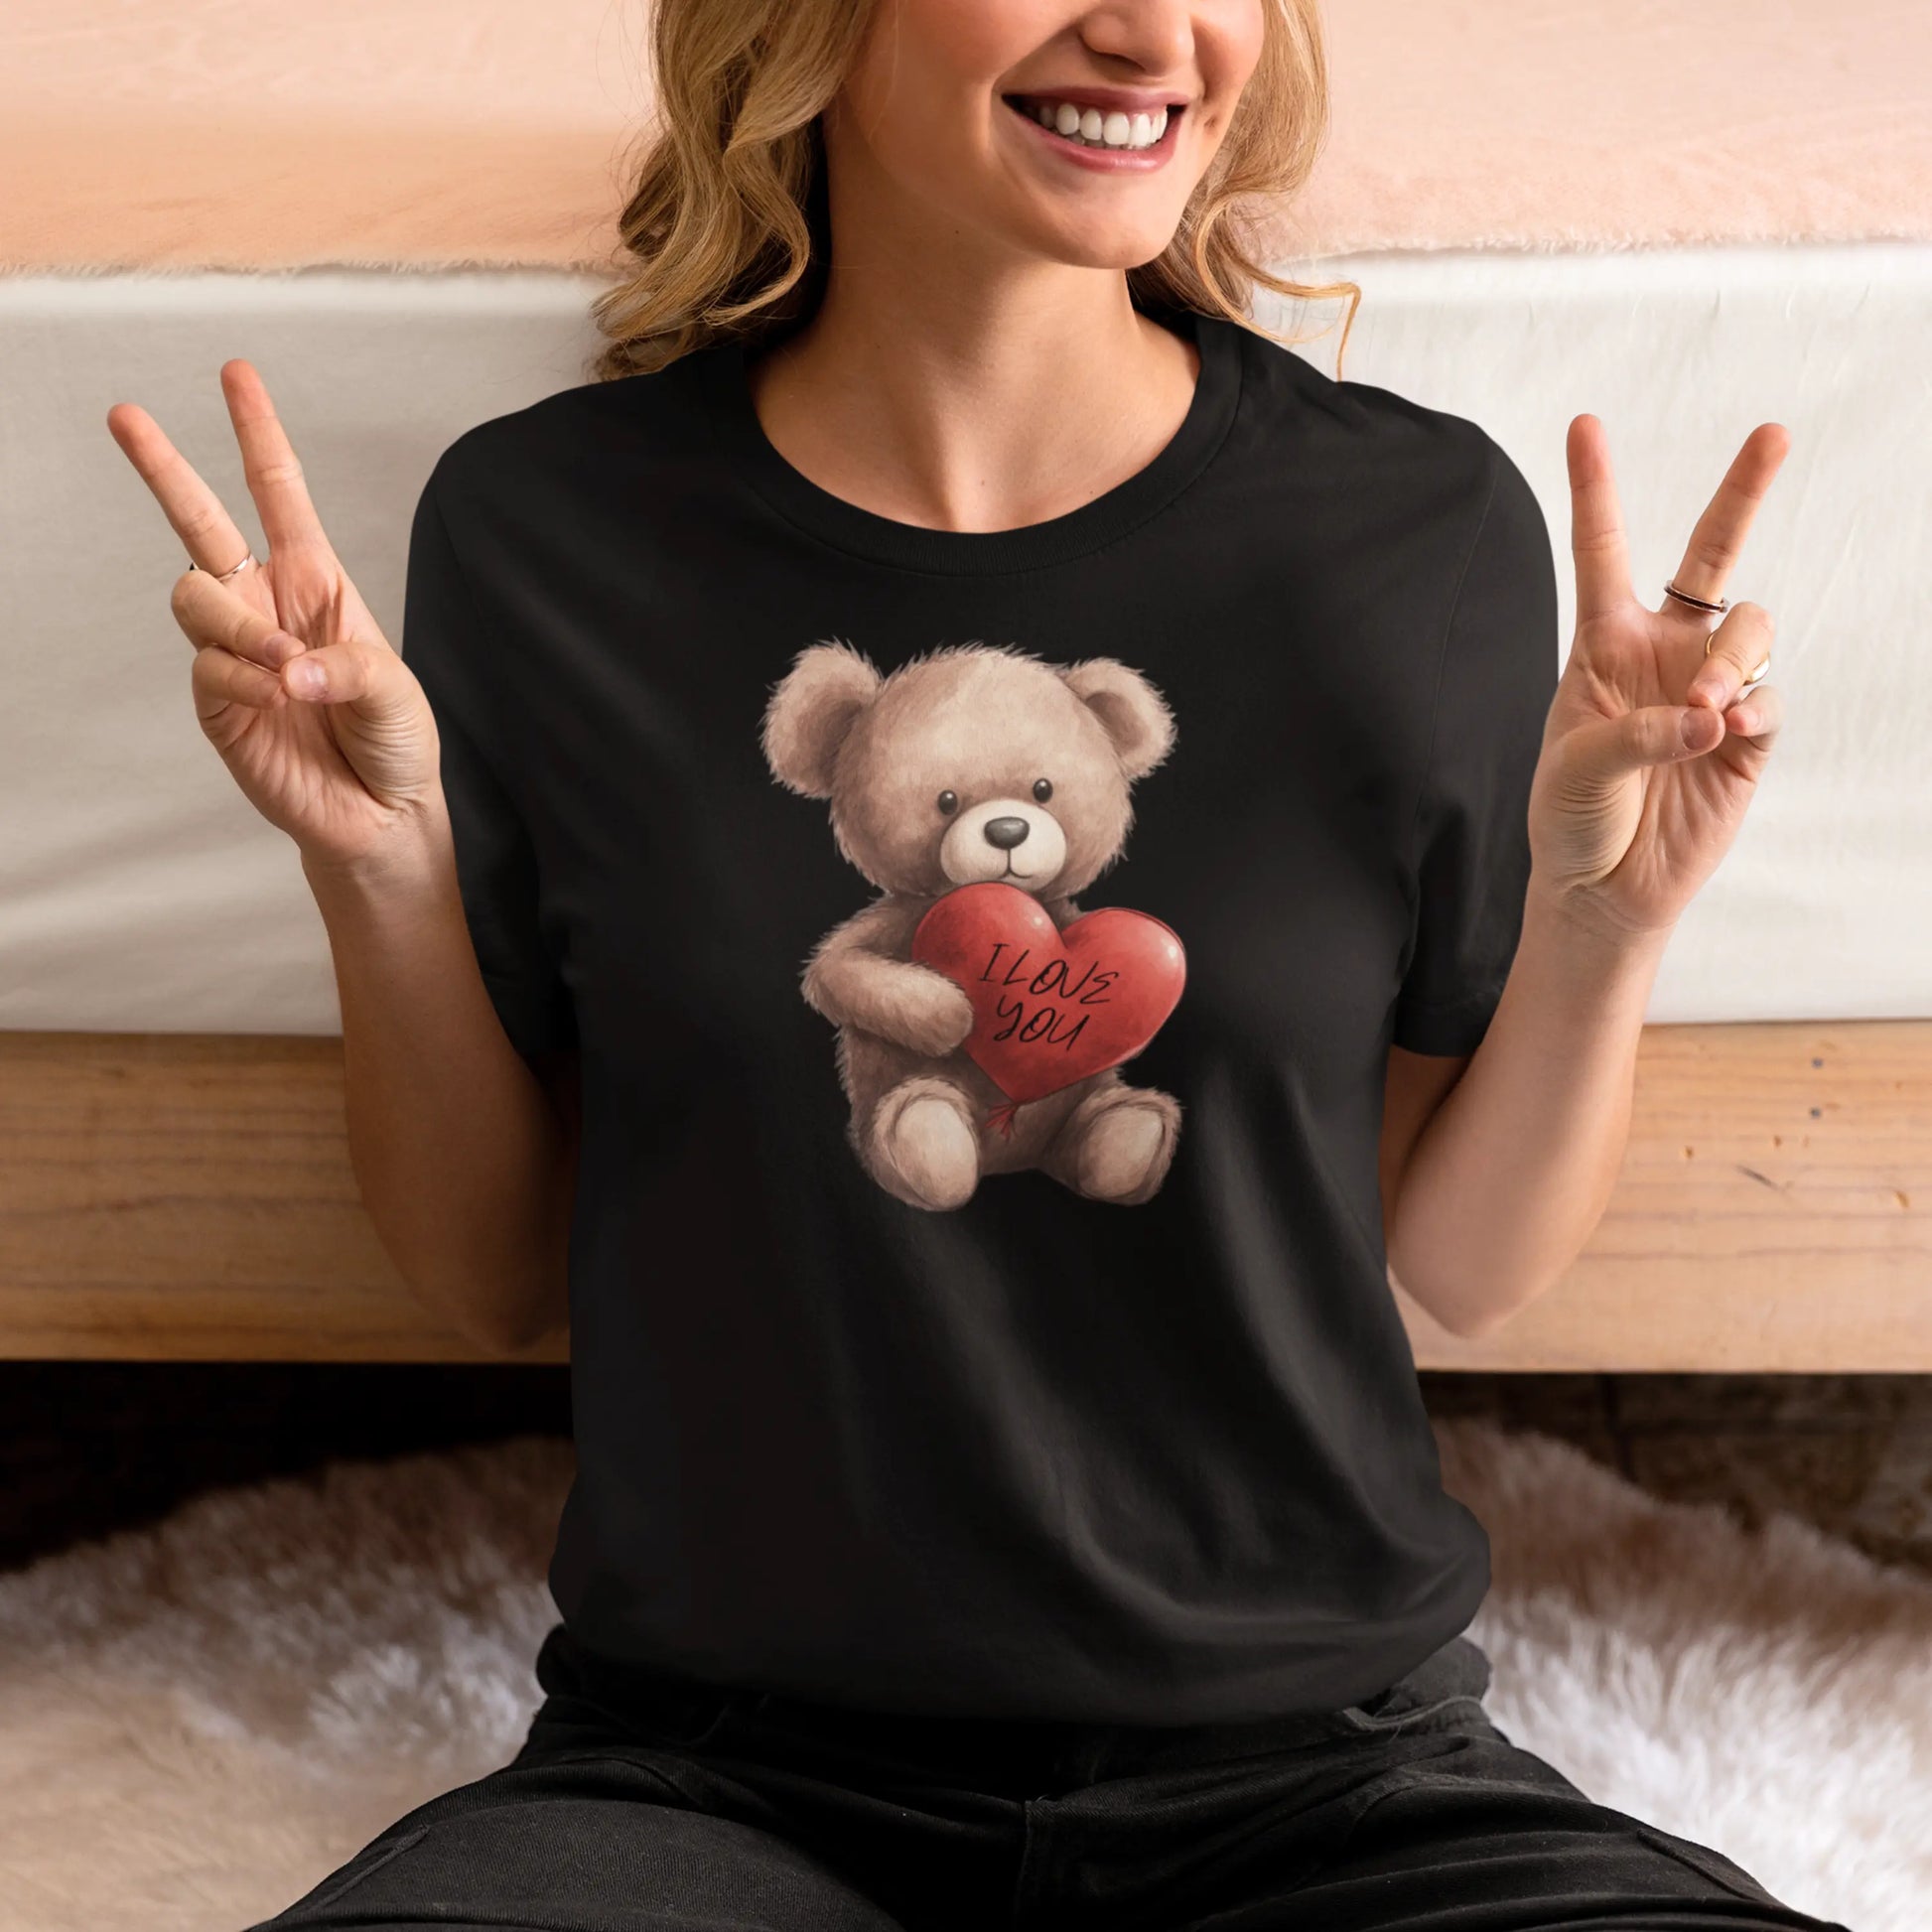 A woman in a black t-shirt is making a peace sign with both hands. The t-shirt features a cute, soft-focus graphic of a teddy bear holding a heart that says 'I Love You.' She is seated with a warm, genuine smile.